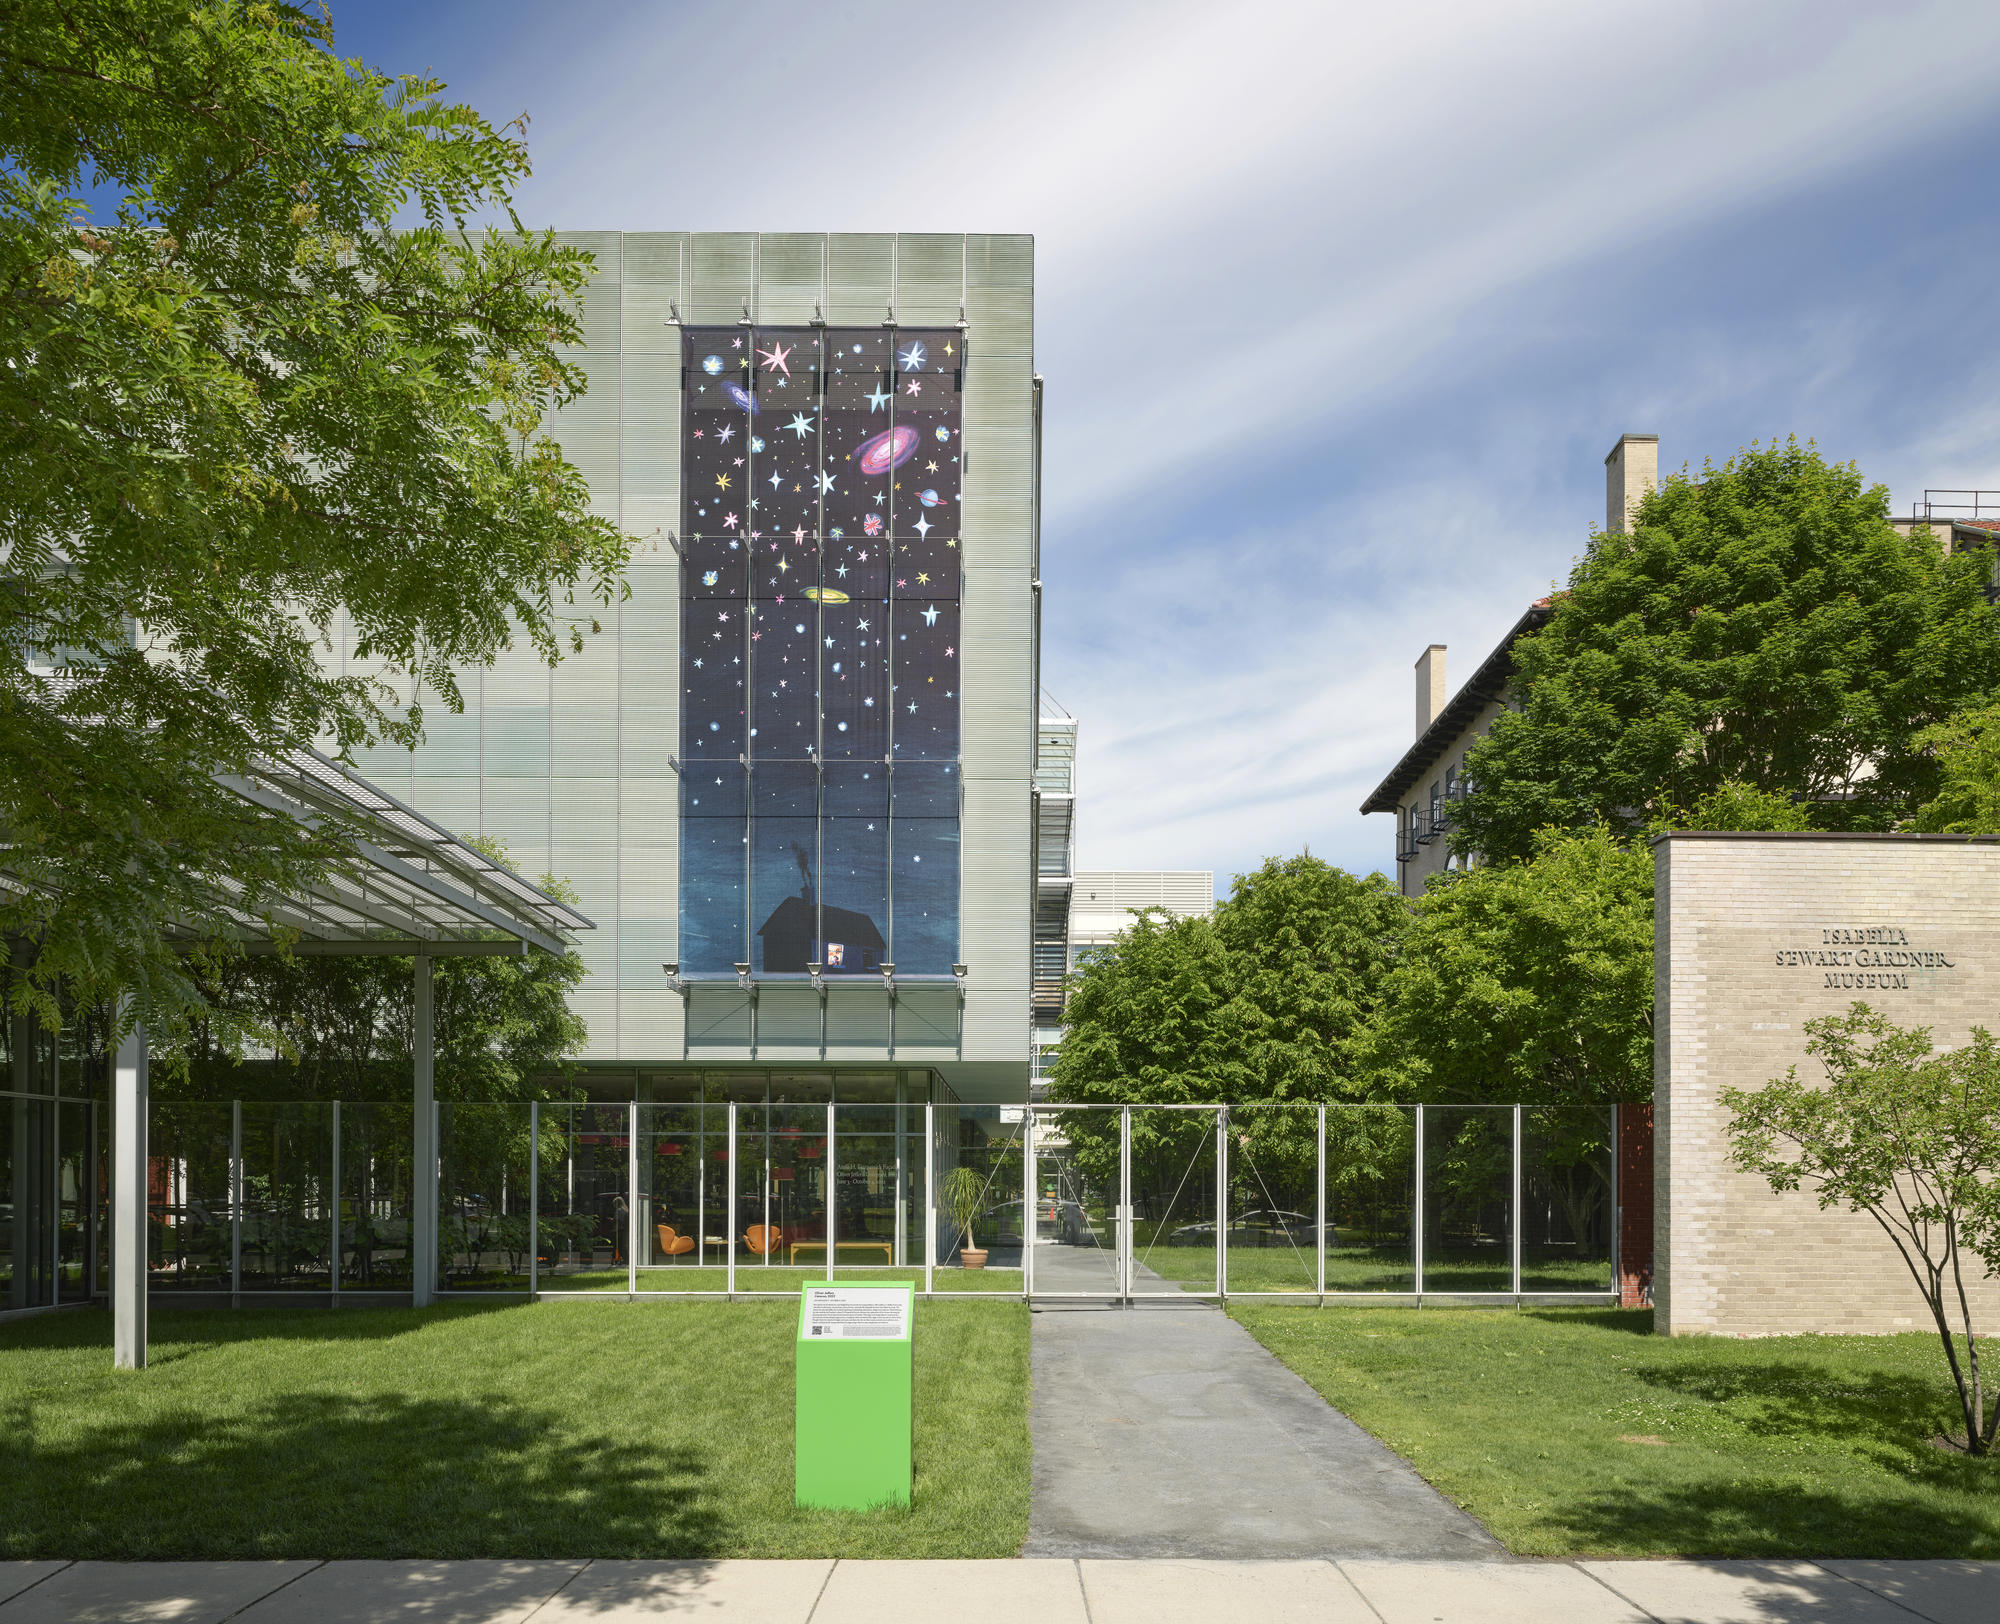 Exterior of the Isabella Stewart Gardner Museum showing a large-scale, 36-foot by 16-foot artwork installed vertically on the outside of the Museum’s New Wing. The artwork depicts a nighttime scene of a house at the bottom with multi-colored stars and galaxies against a dark blue sky above it. 